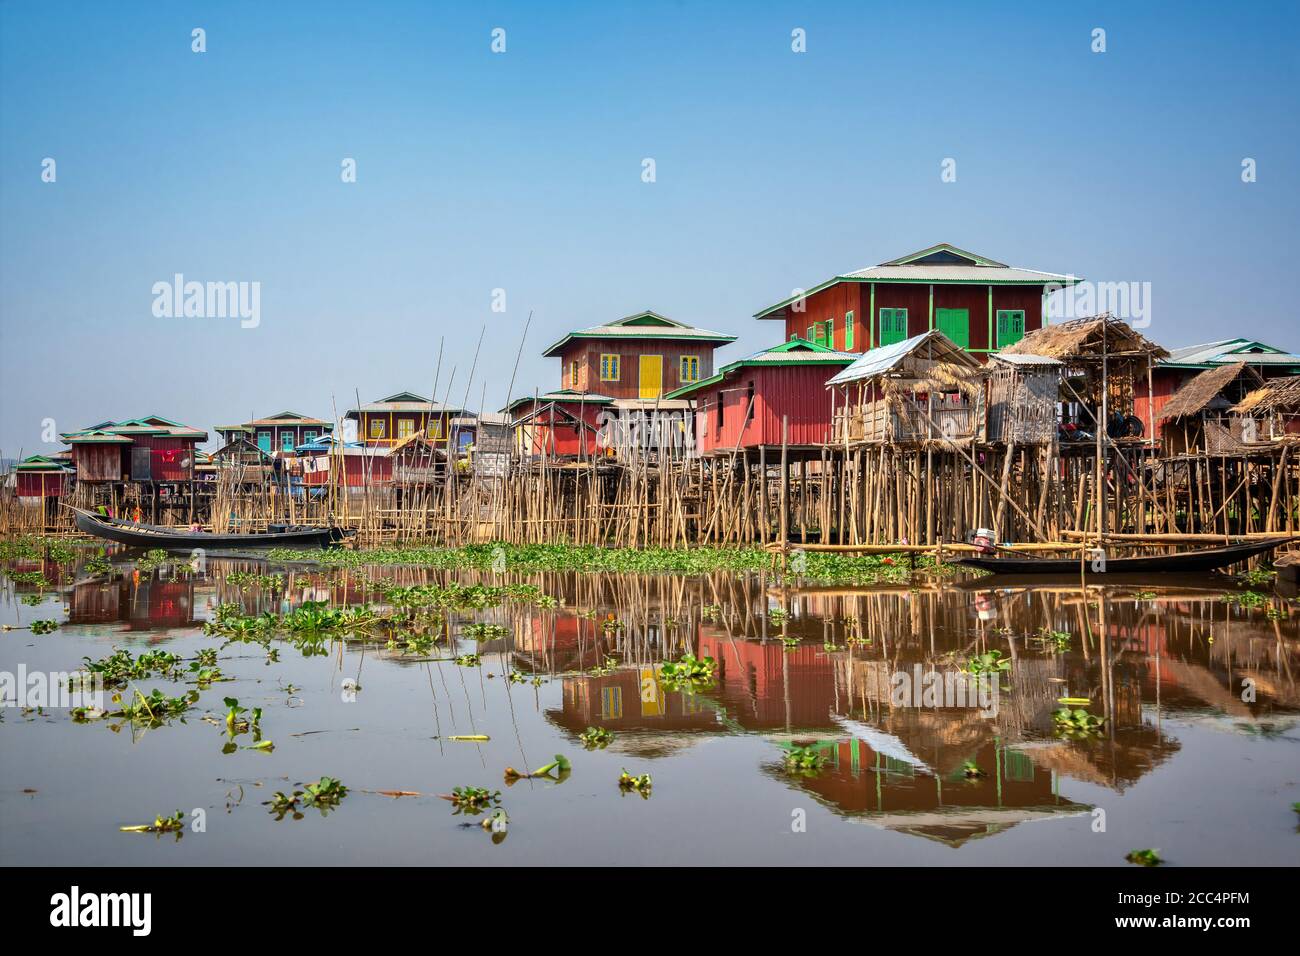 Colorful floating village with stilt-houses on Inle lake in Burma, Myanmar Stock Photo